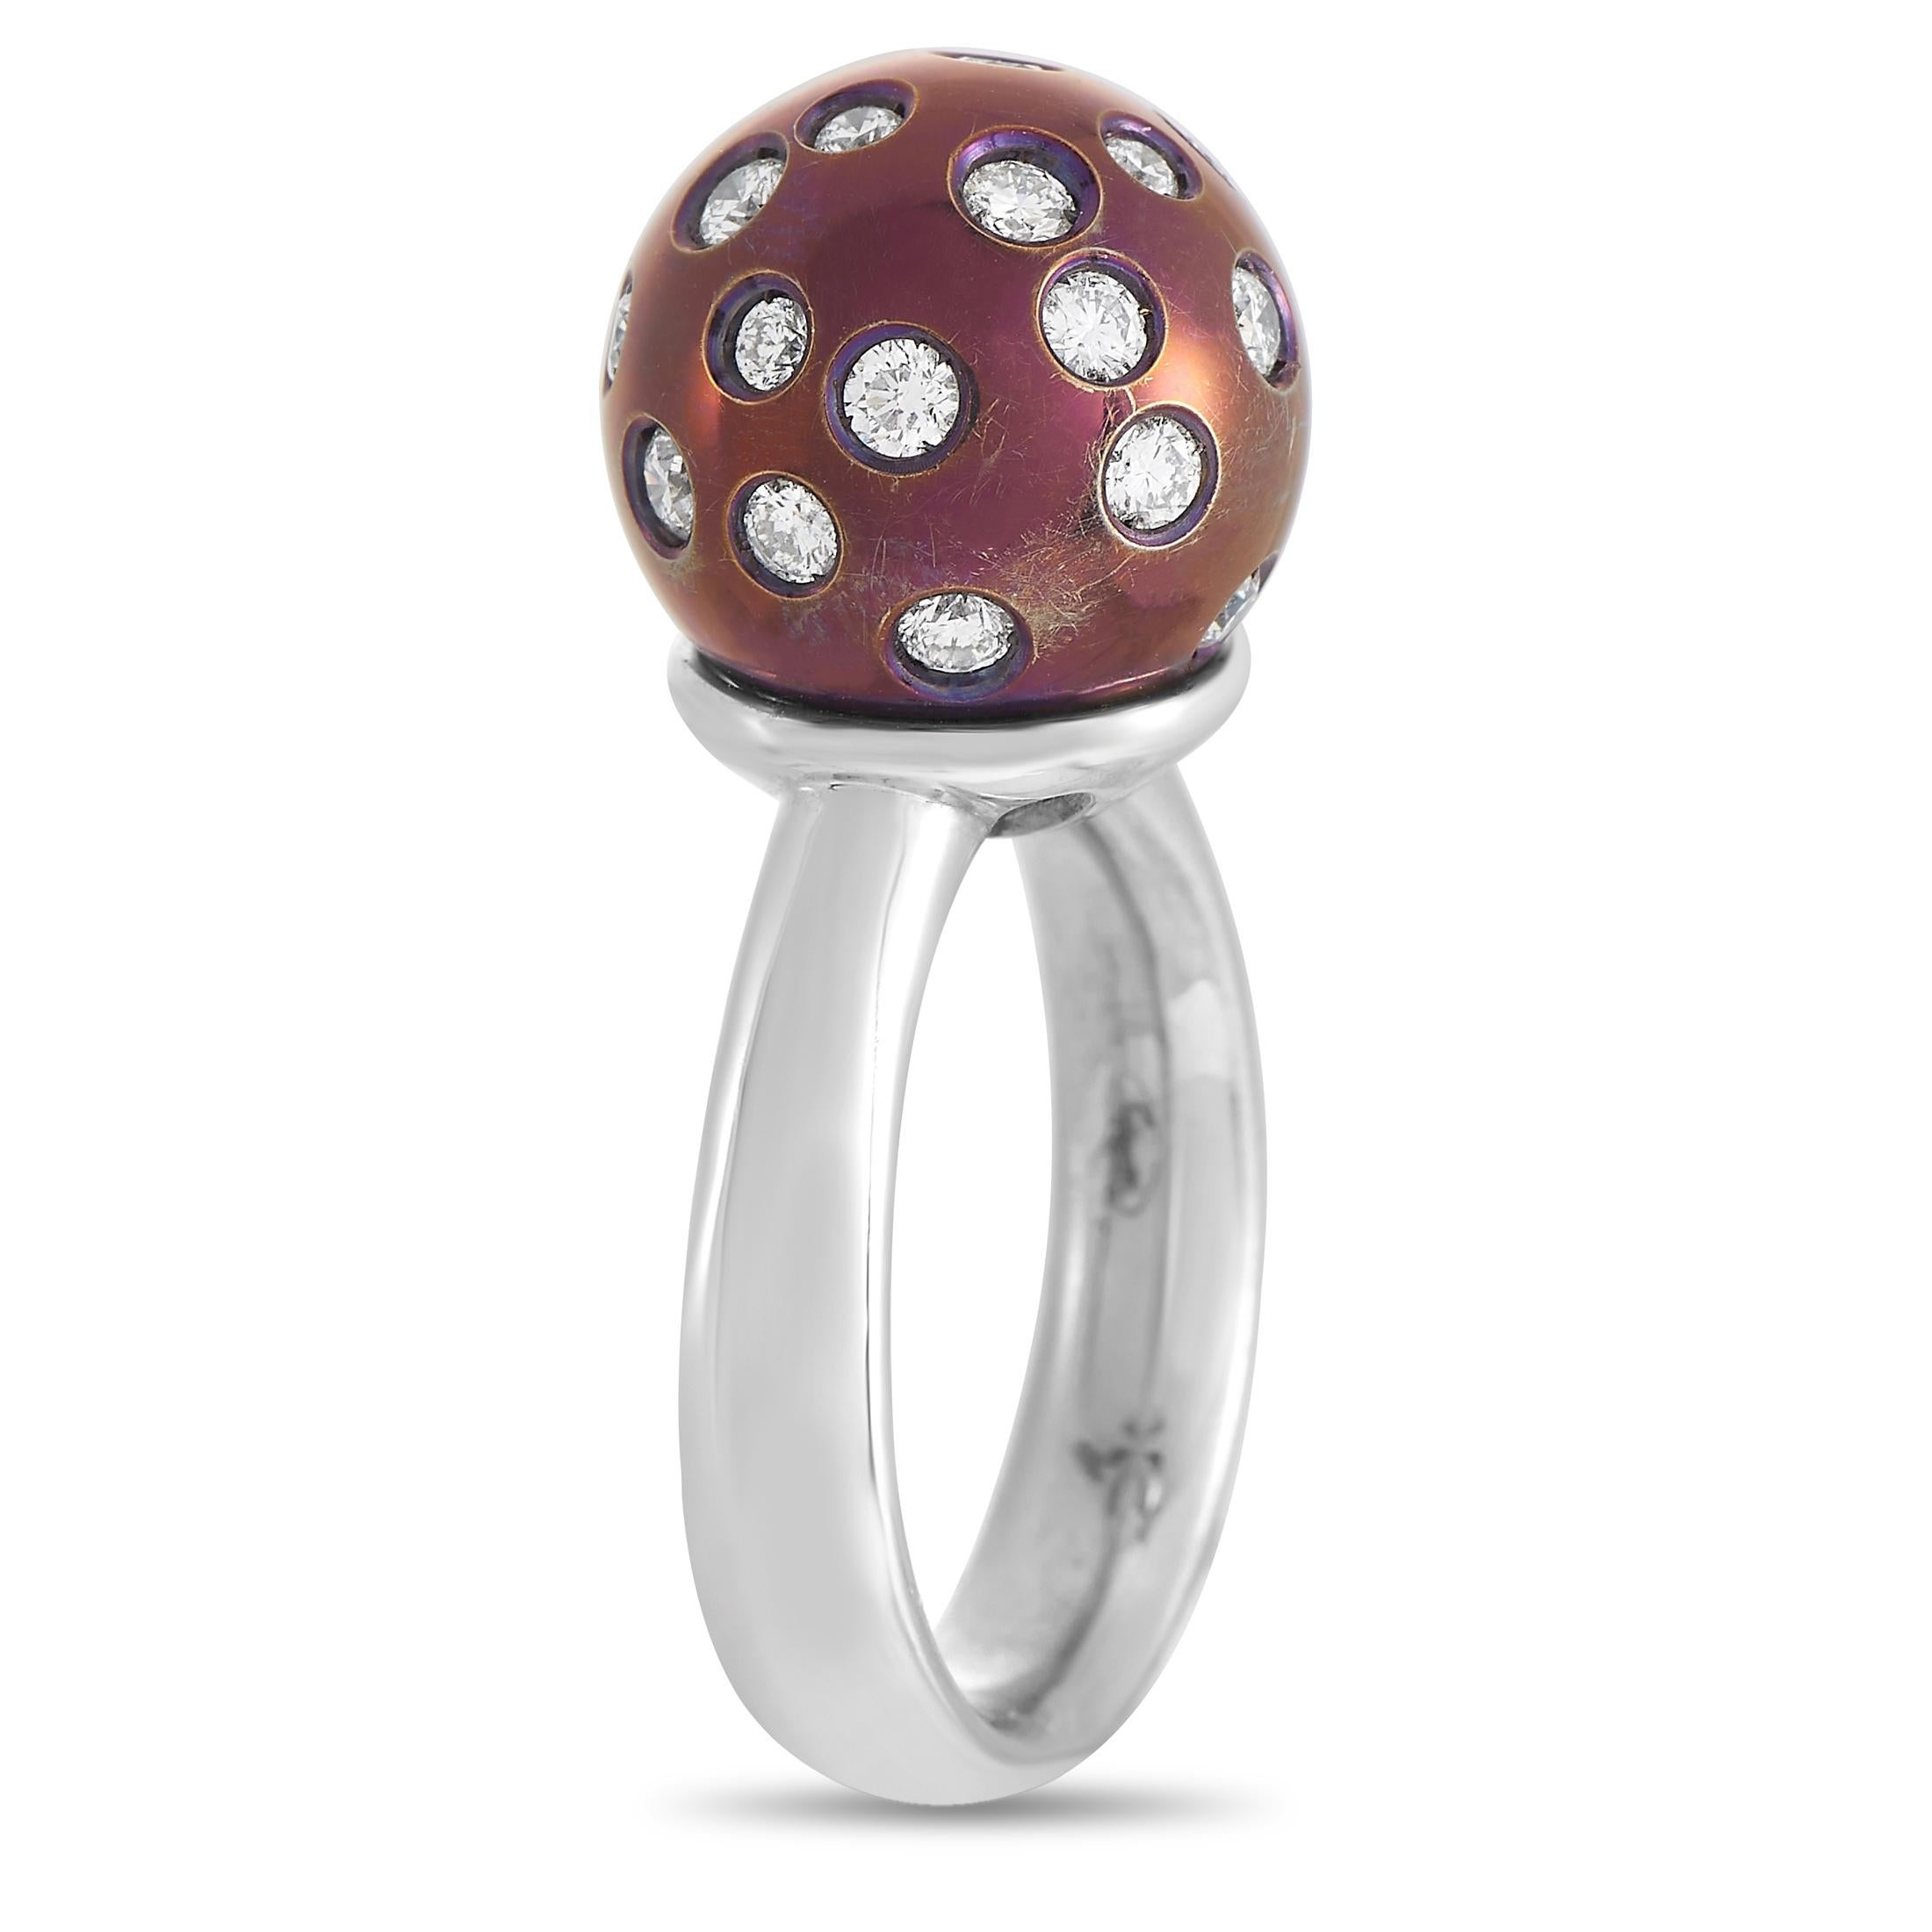 This ring from Salavetti is exceptionally gorgeous and unique. The ring is made of 18K white gold and has a metallic purple accent studded with 0.98 carats of diamonds.